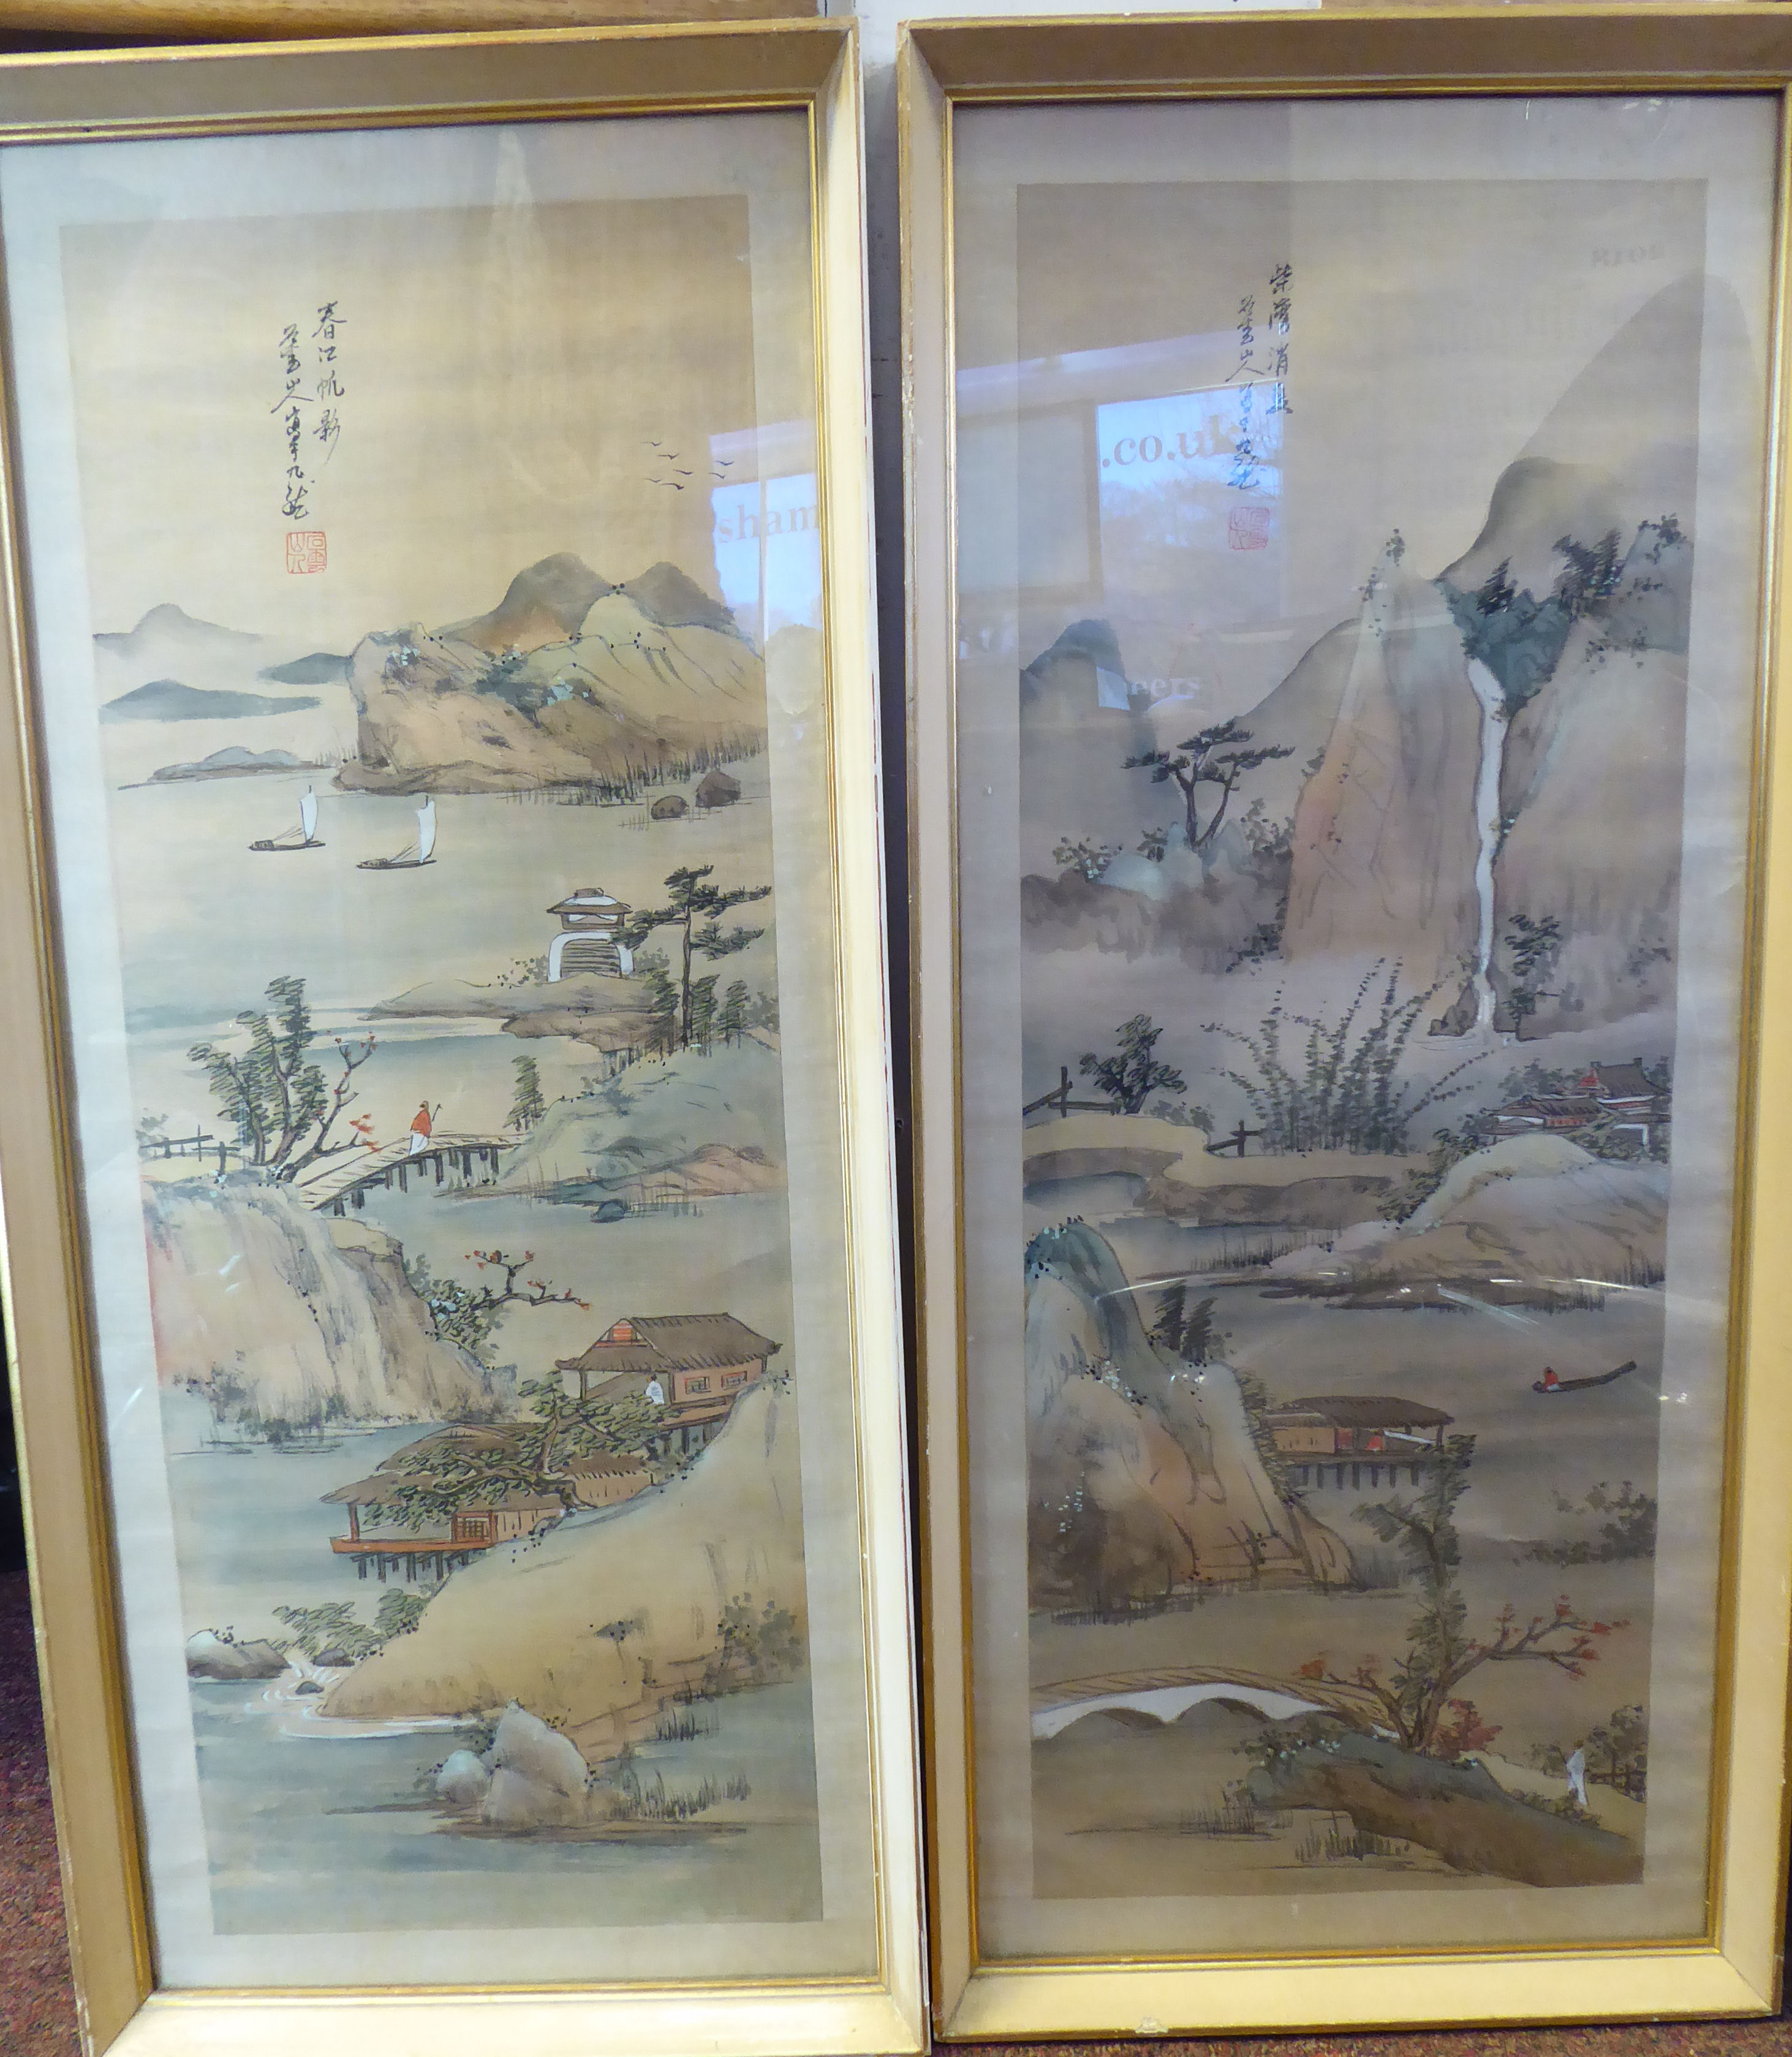 A pair of early 20thC Chinese paintings on silk panels, depicting shoreline scenes with small boats,